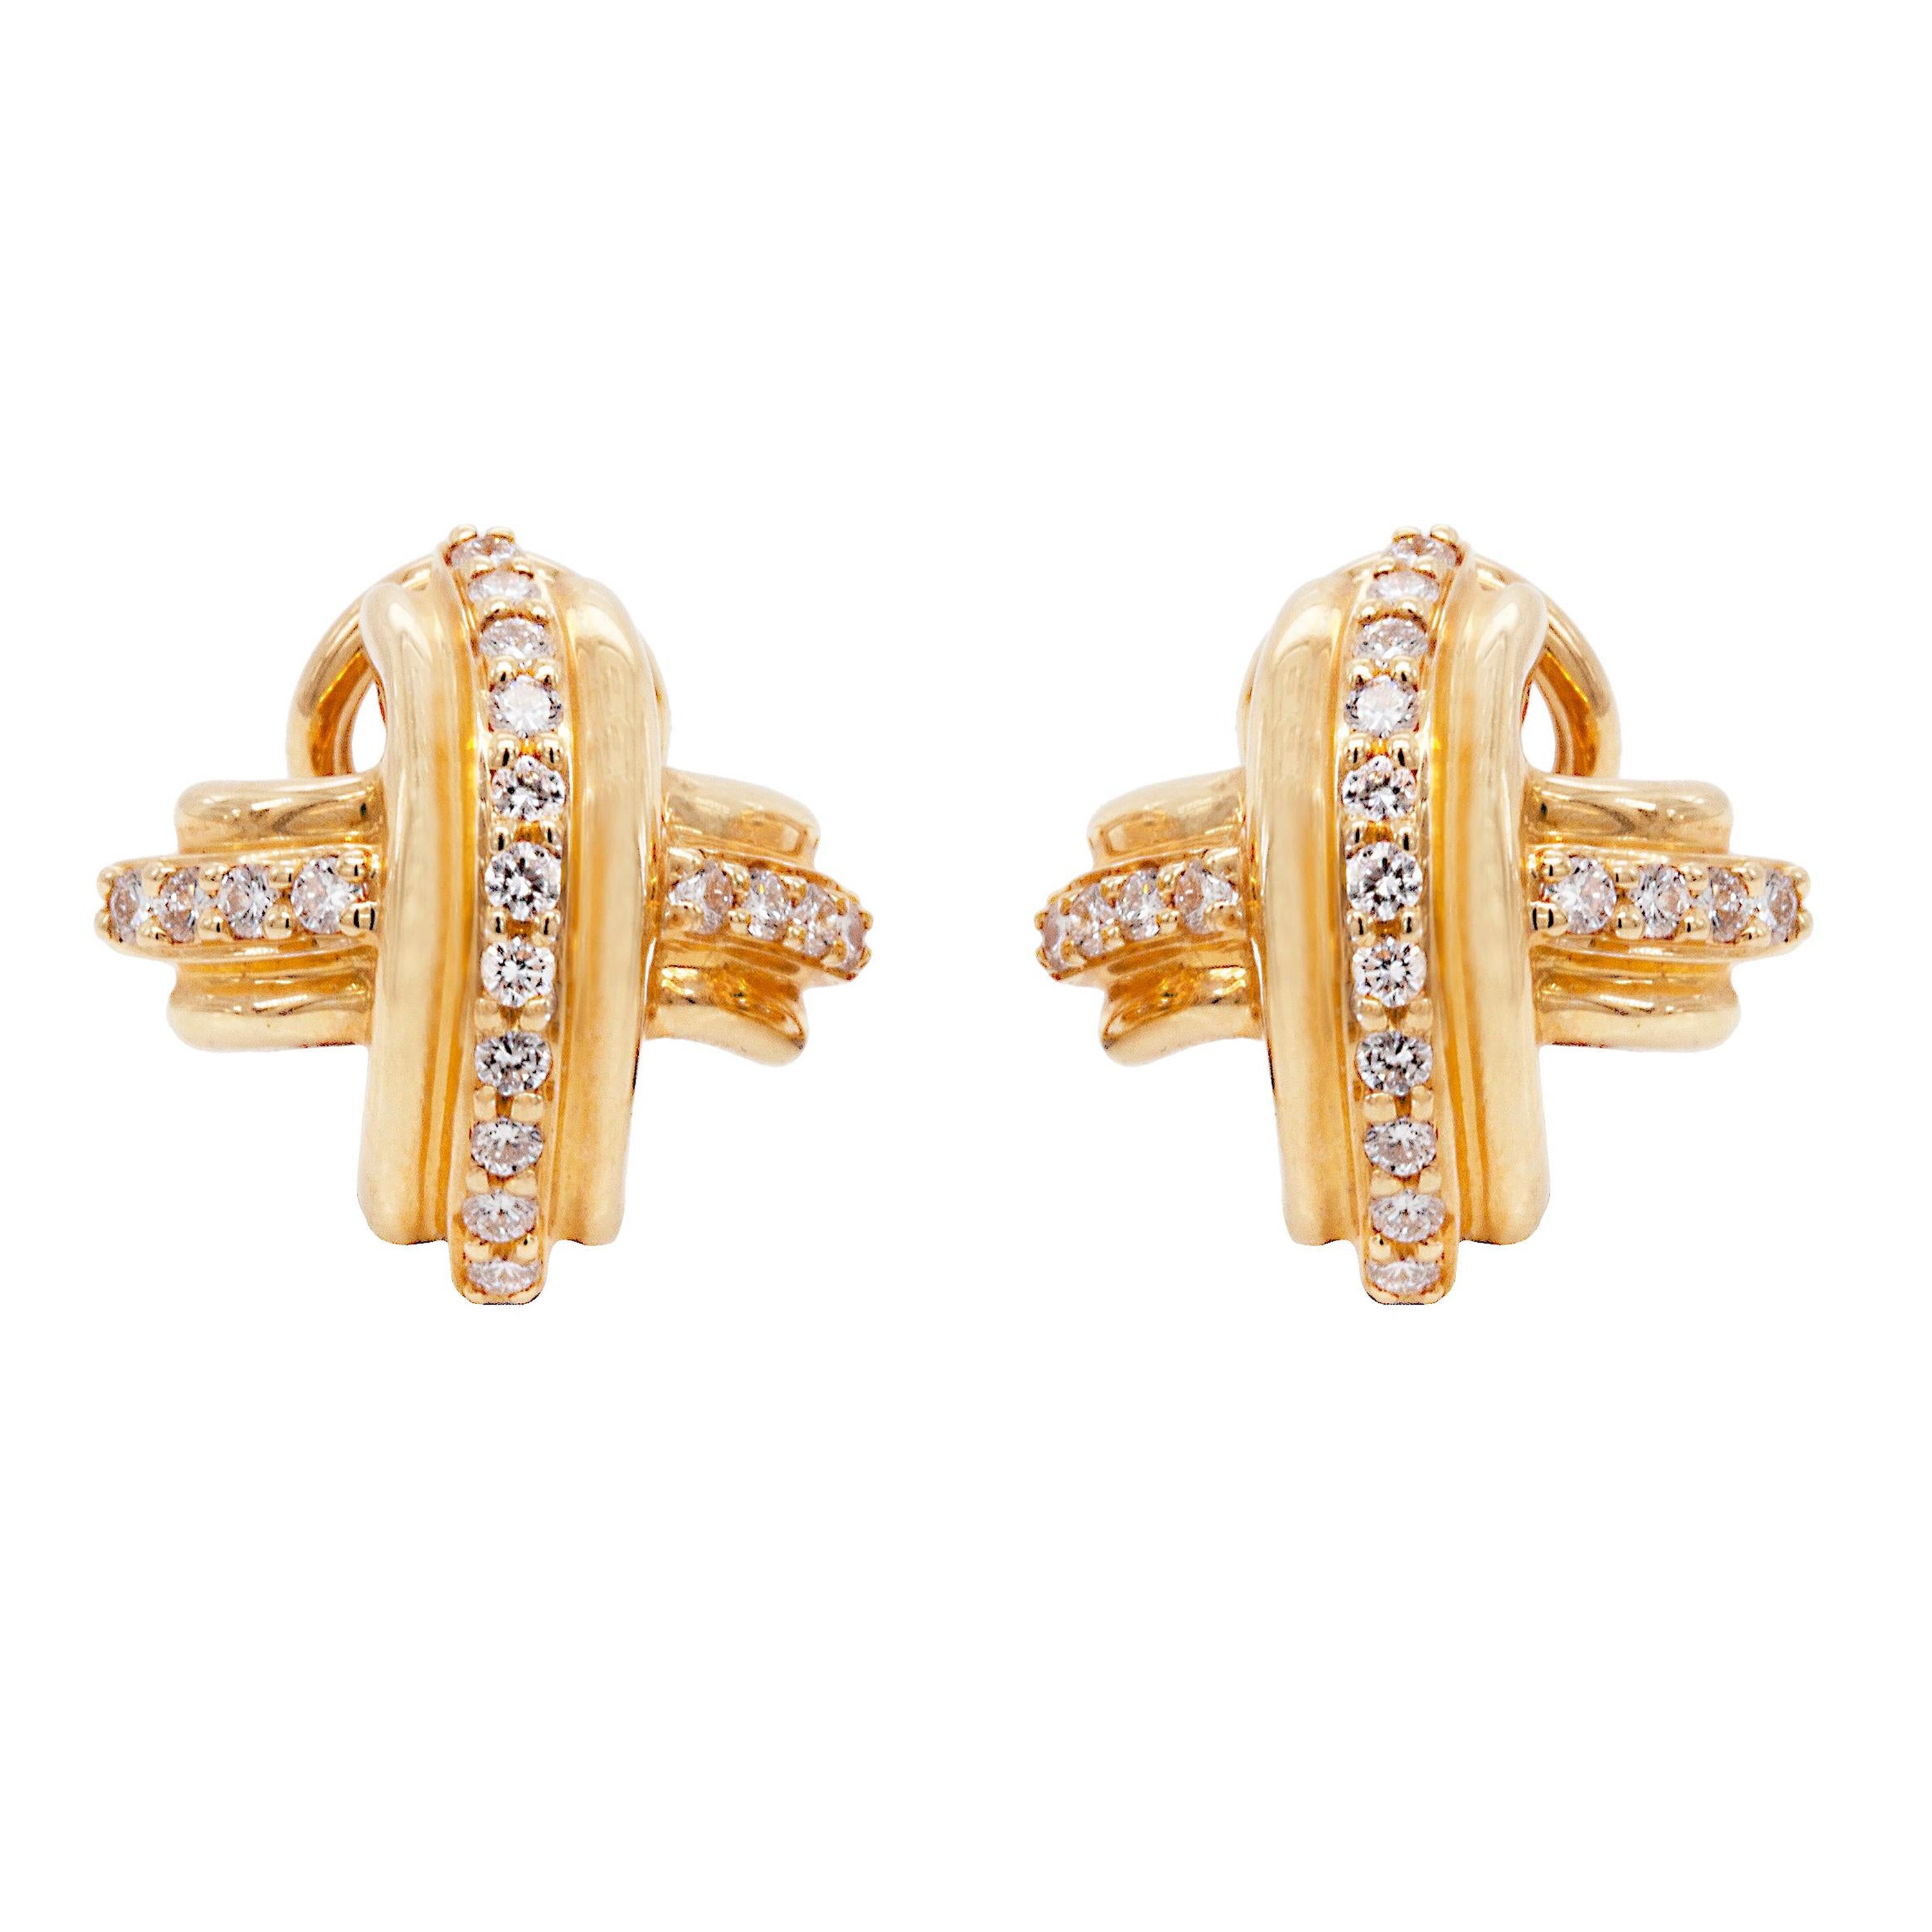 Tiffany & Co. 18ct Yellow Gold and Diamond 'Kiss' Earrings For Sale